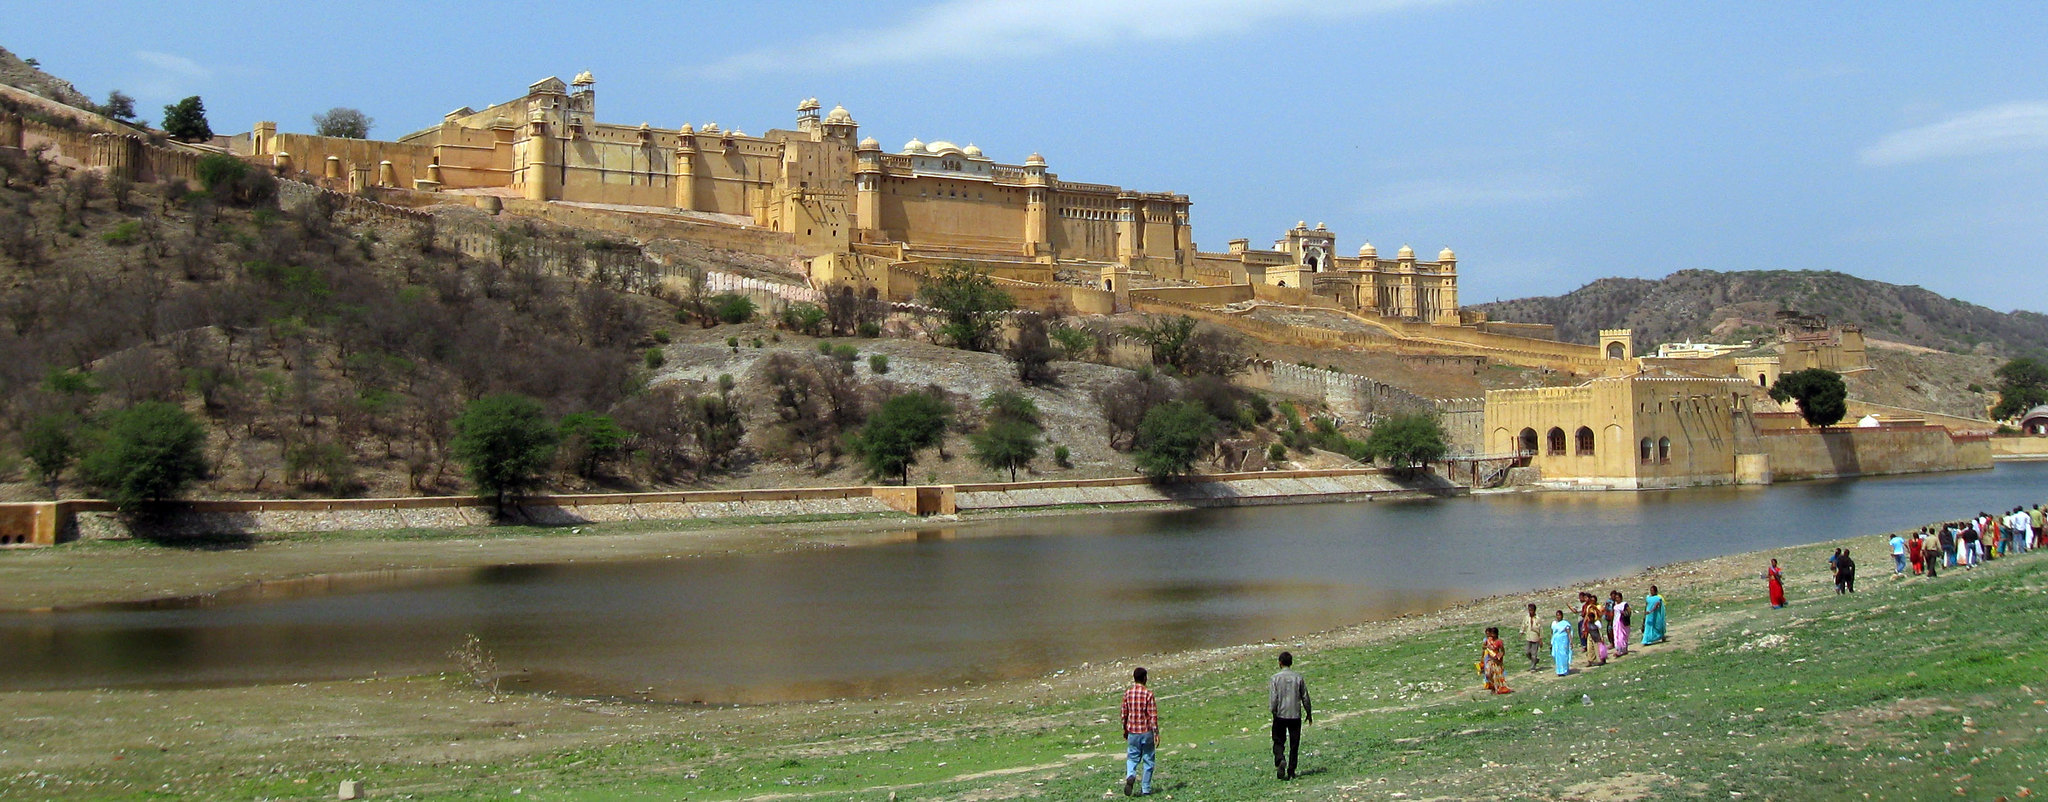 Rajasthan Tour Packages for Families, Couples & Friends